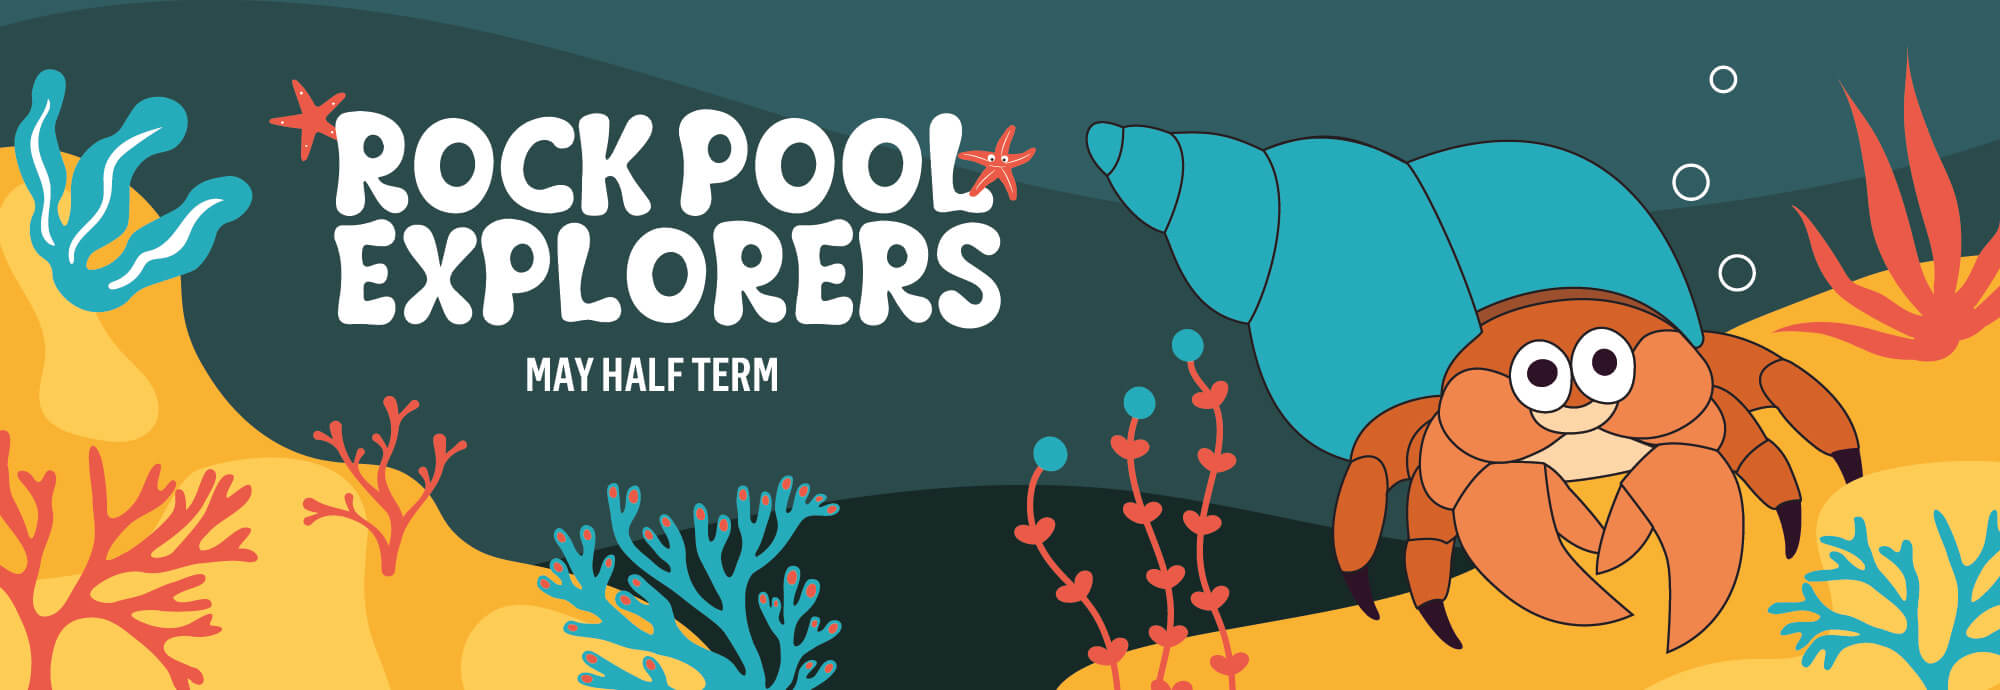 A brightly coloured illustration for NMMC's Rock Pool Explorers event. It features an orange hermit crab with a blue shell on the seabed surrounded by seaweed.